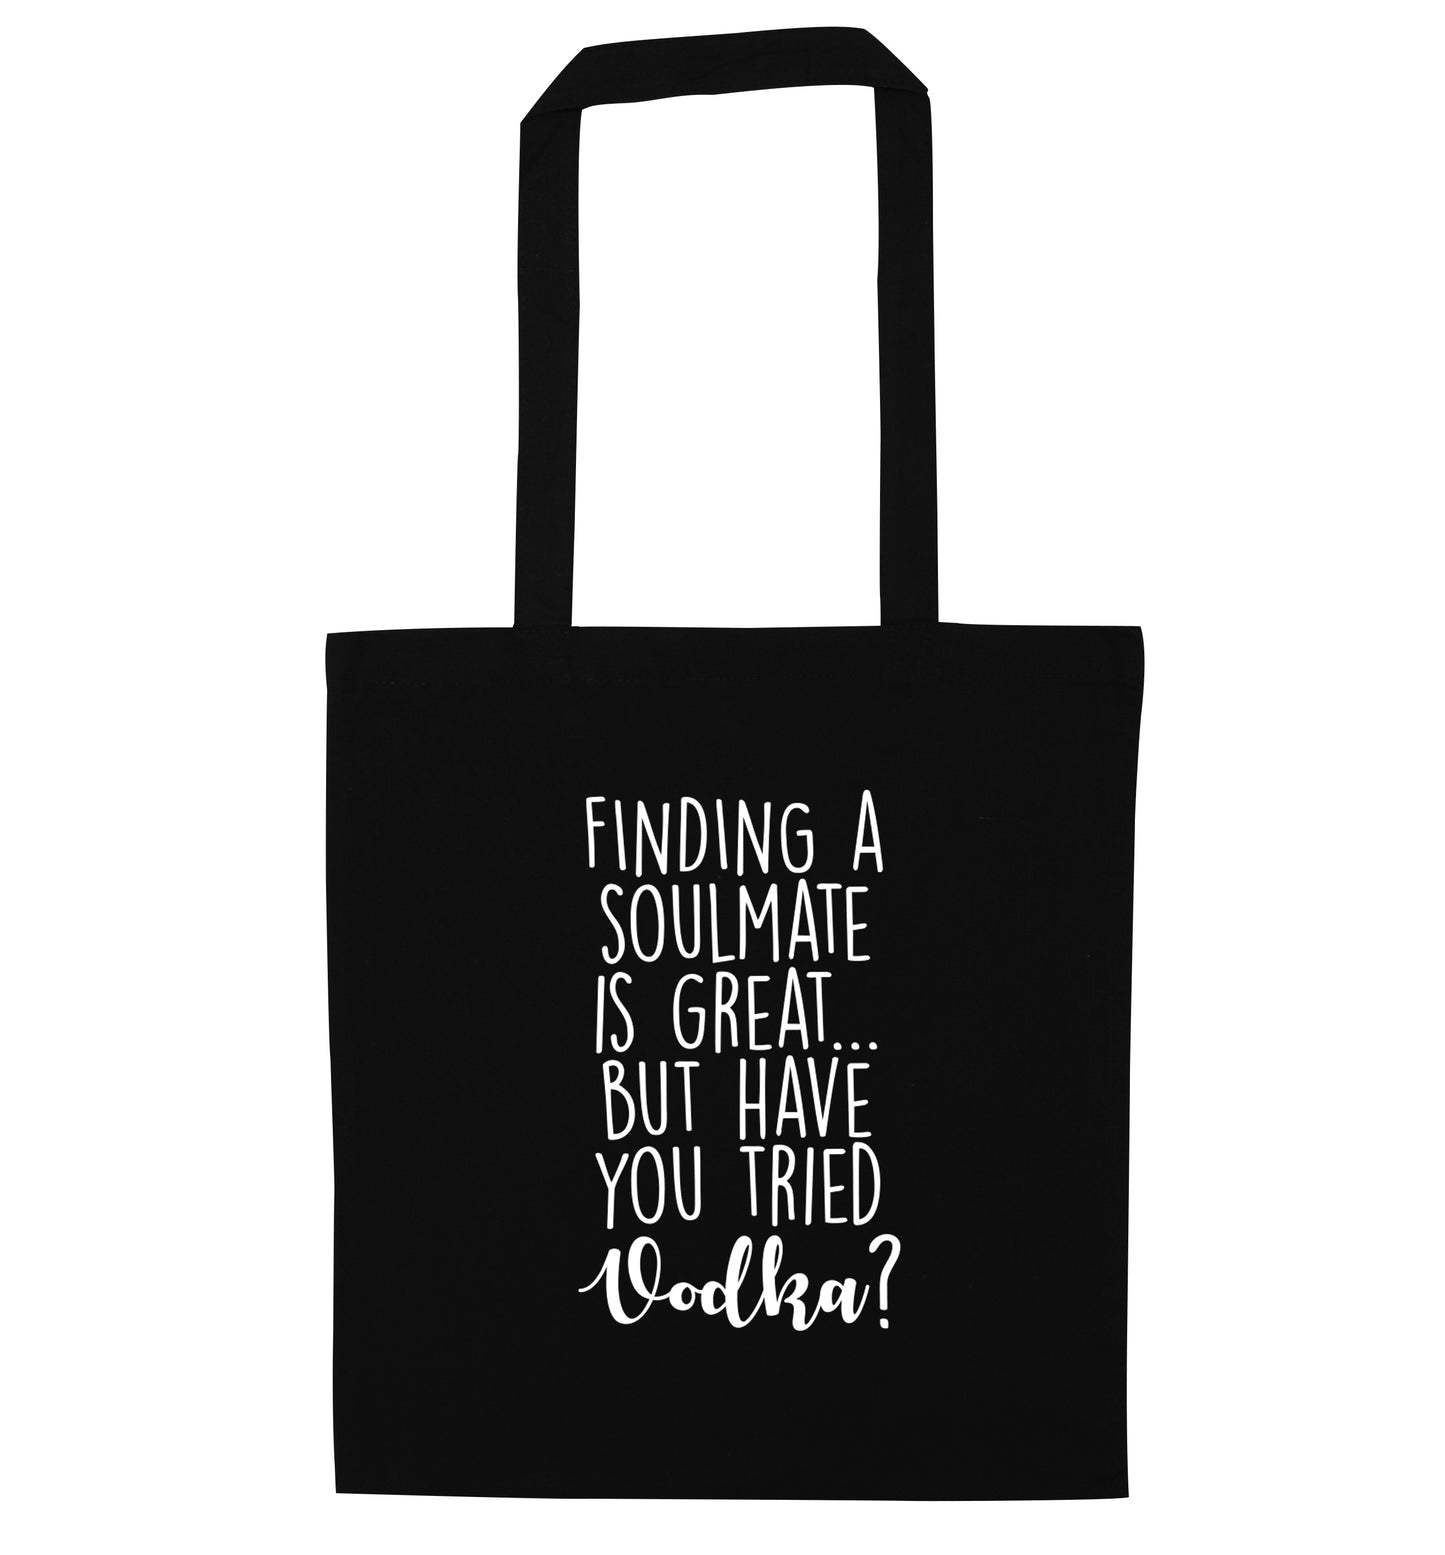 Finding a soulmate is great but have you tried vodka? black tote bag